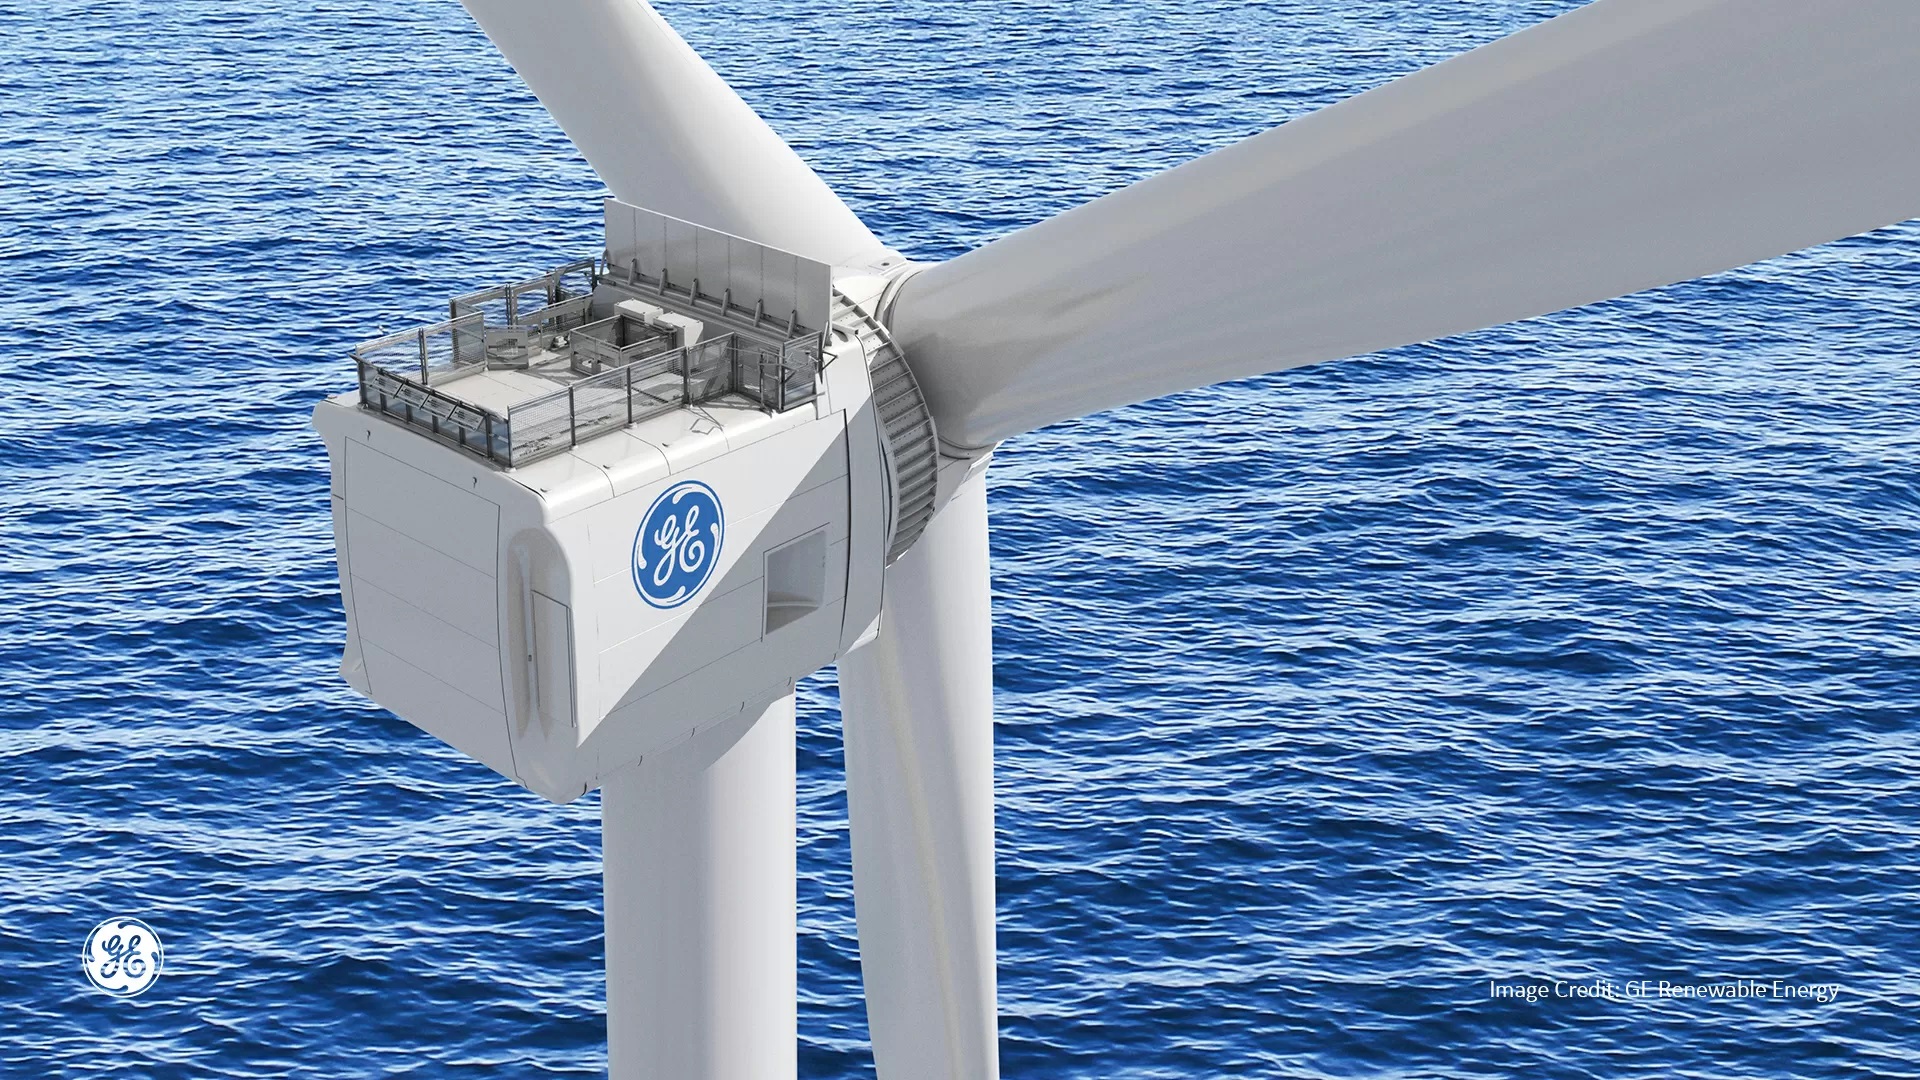 World's largest wind turbine finds home in the Netherlands - Offshore Energy